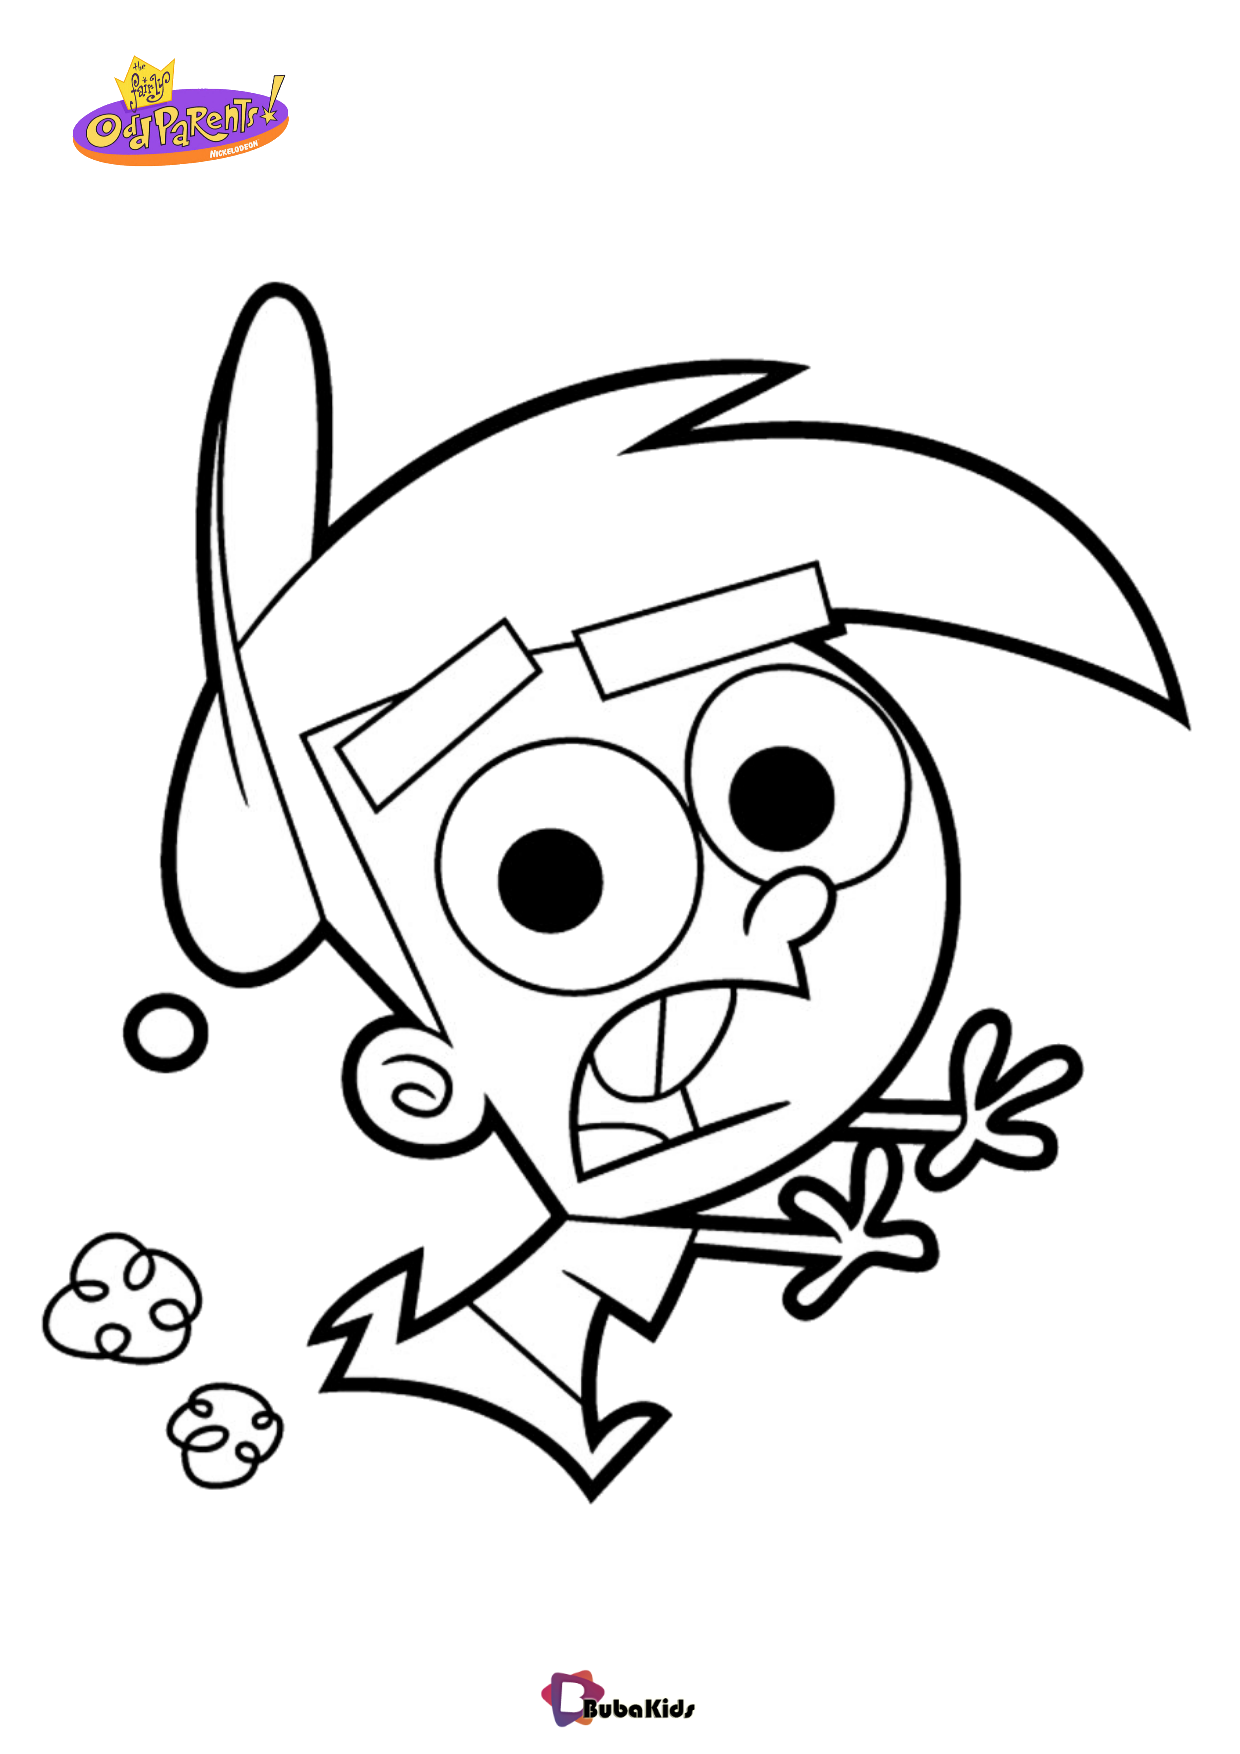 Fairly Oddparents Nickelodeon children tv series coloring pages bubakids.com Wallpaper